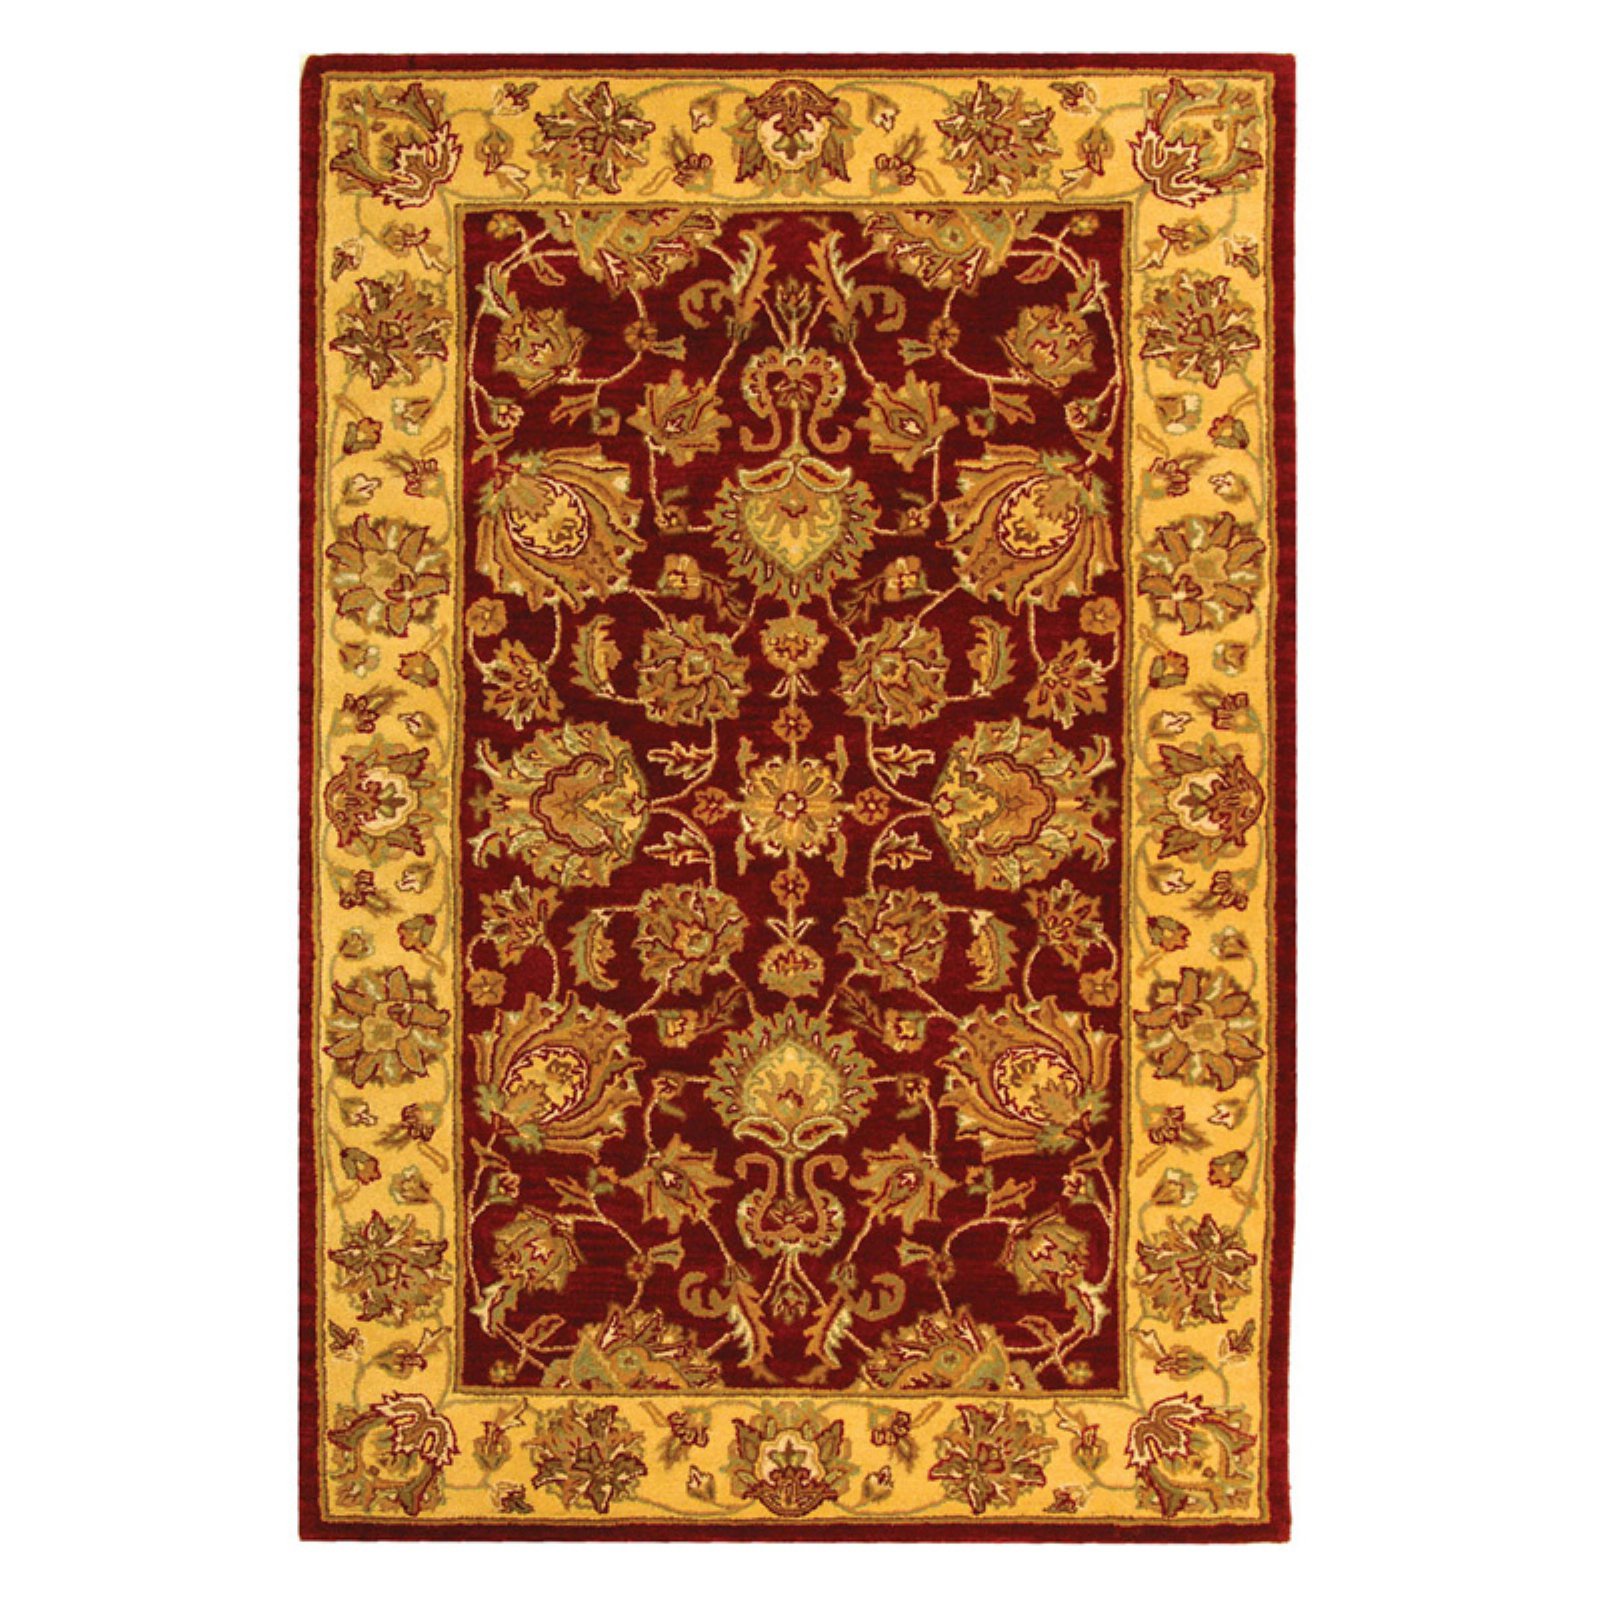 SAFAVIEH Heritage Regis Traditional Wool Area Rug, Red/Gold, 8' x 8' Round - image 1 of 4